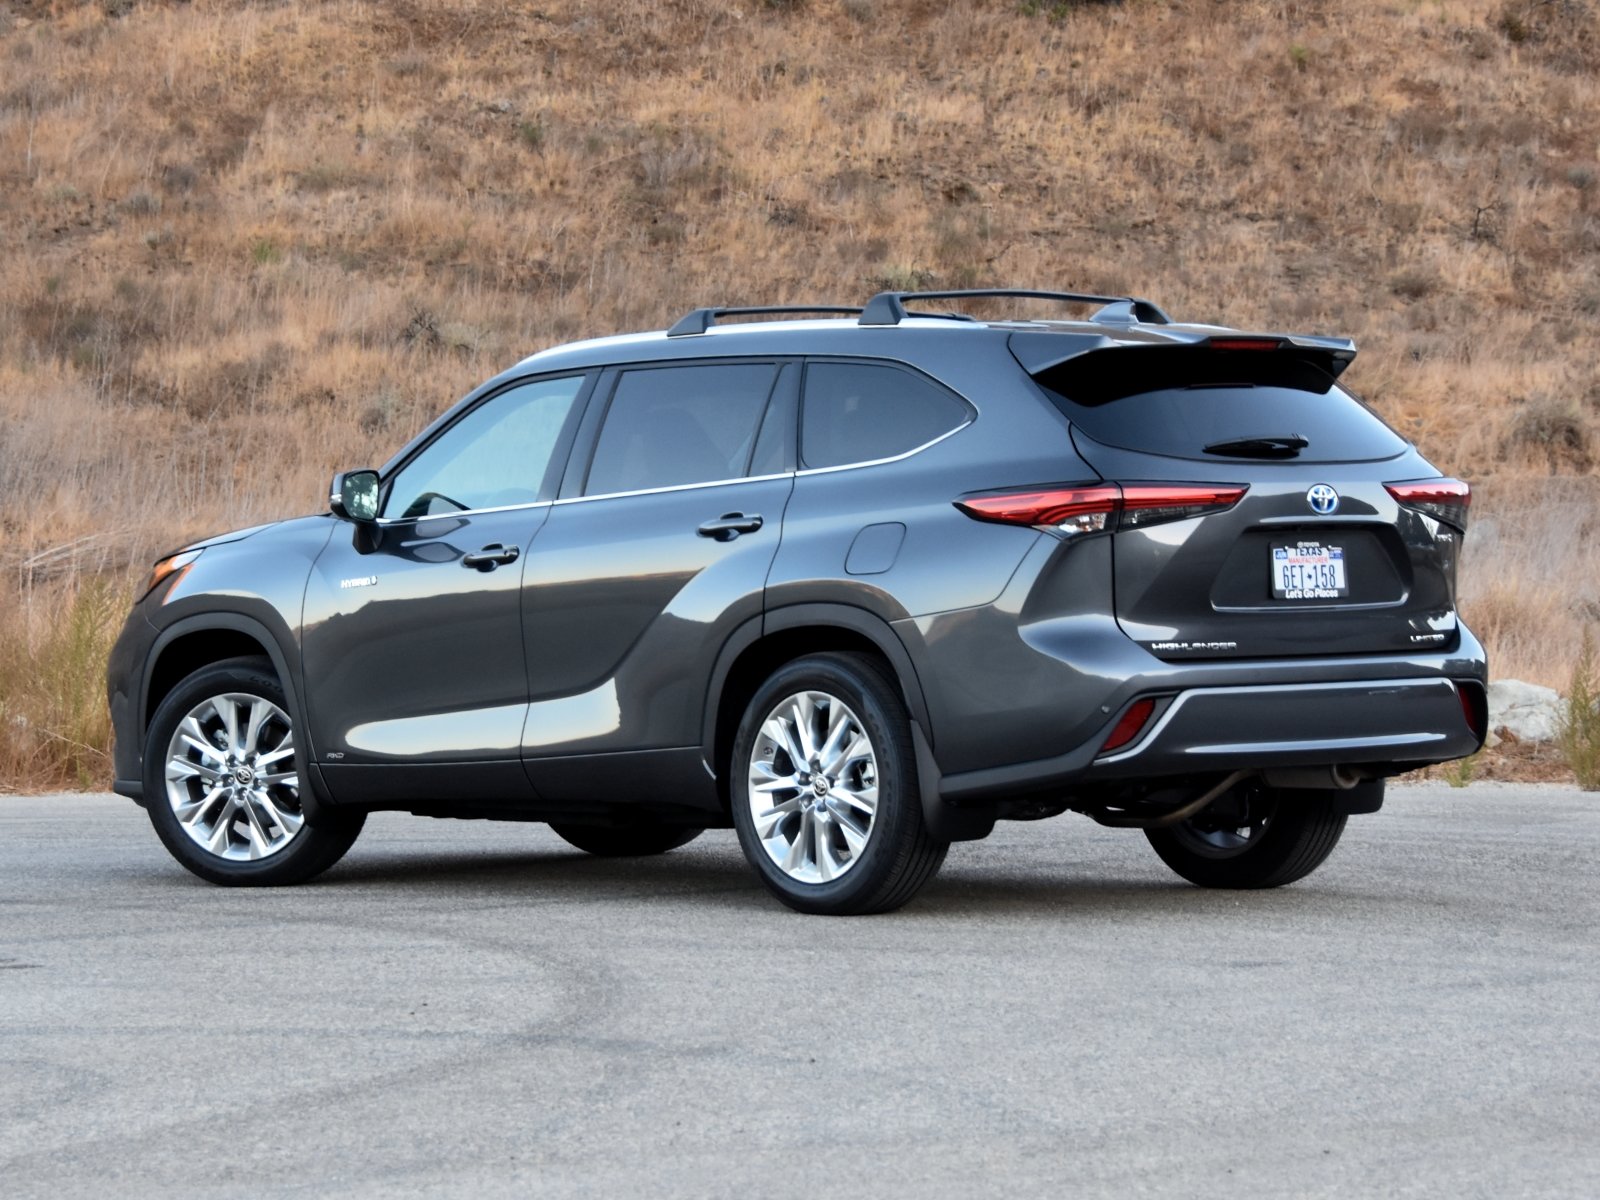 2021 Toyota Highlander Hybrid: Prices, Reviews & Pictures - CarGurus